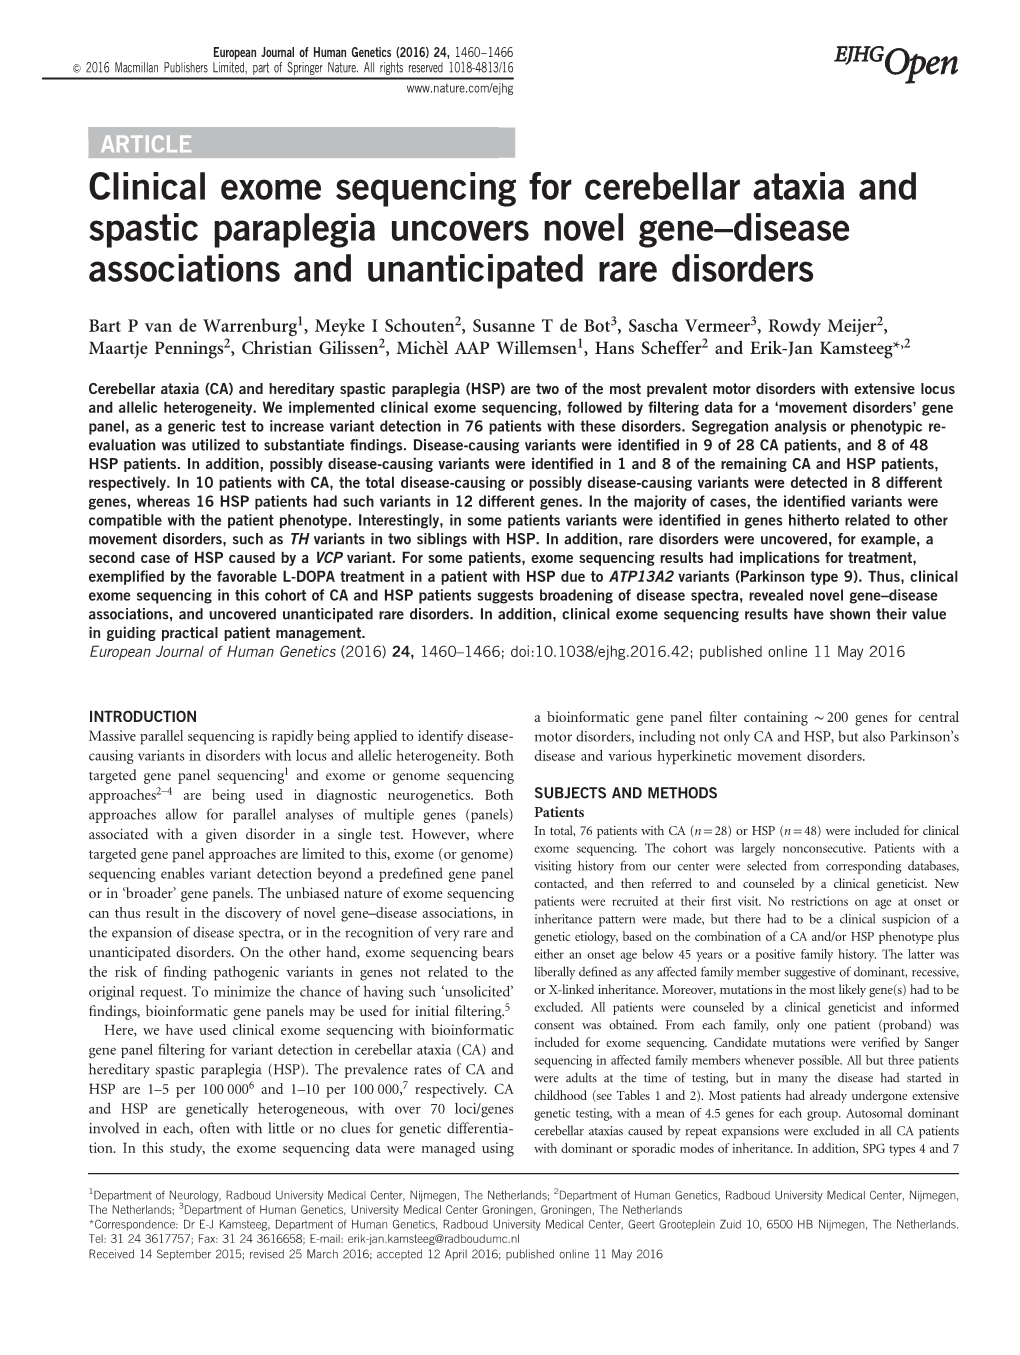 Clinical Exome Sequencing for Cerebellar Ataxia and Spastic Paraplegia Uncovers Novel Gene–Disease Associations and Unanticipated Rare Disorders